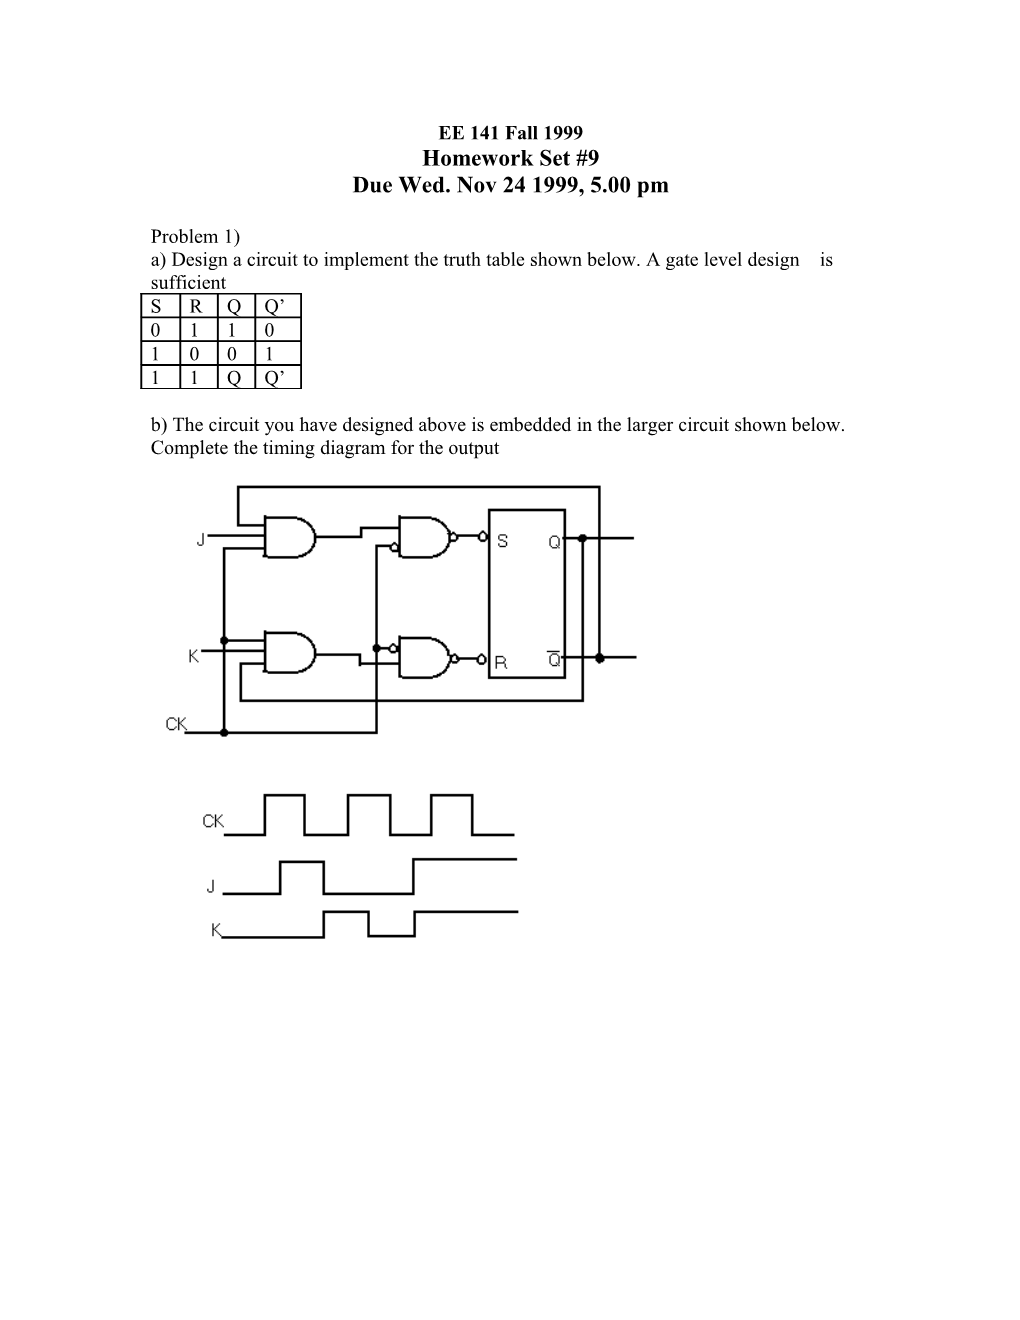 A) Design a Circuit to Implement the Truth Table Shown Below. a Gate Level Design Is Sufficient